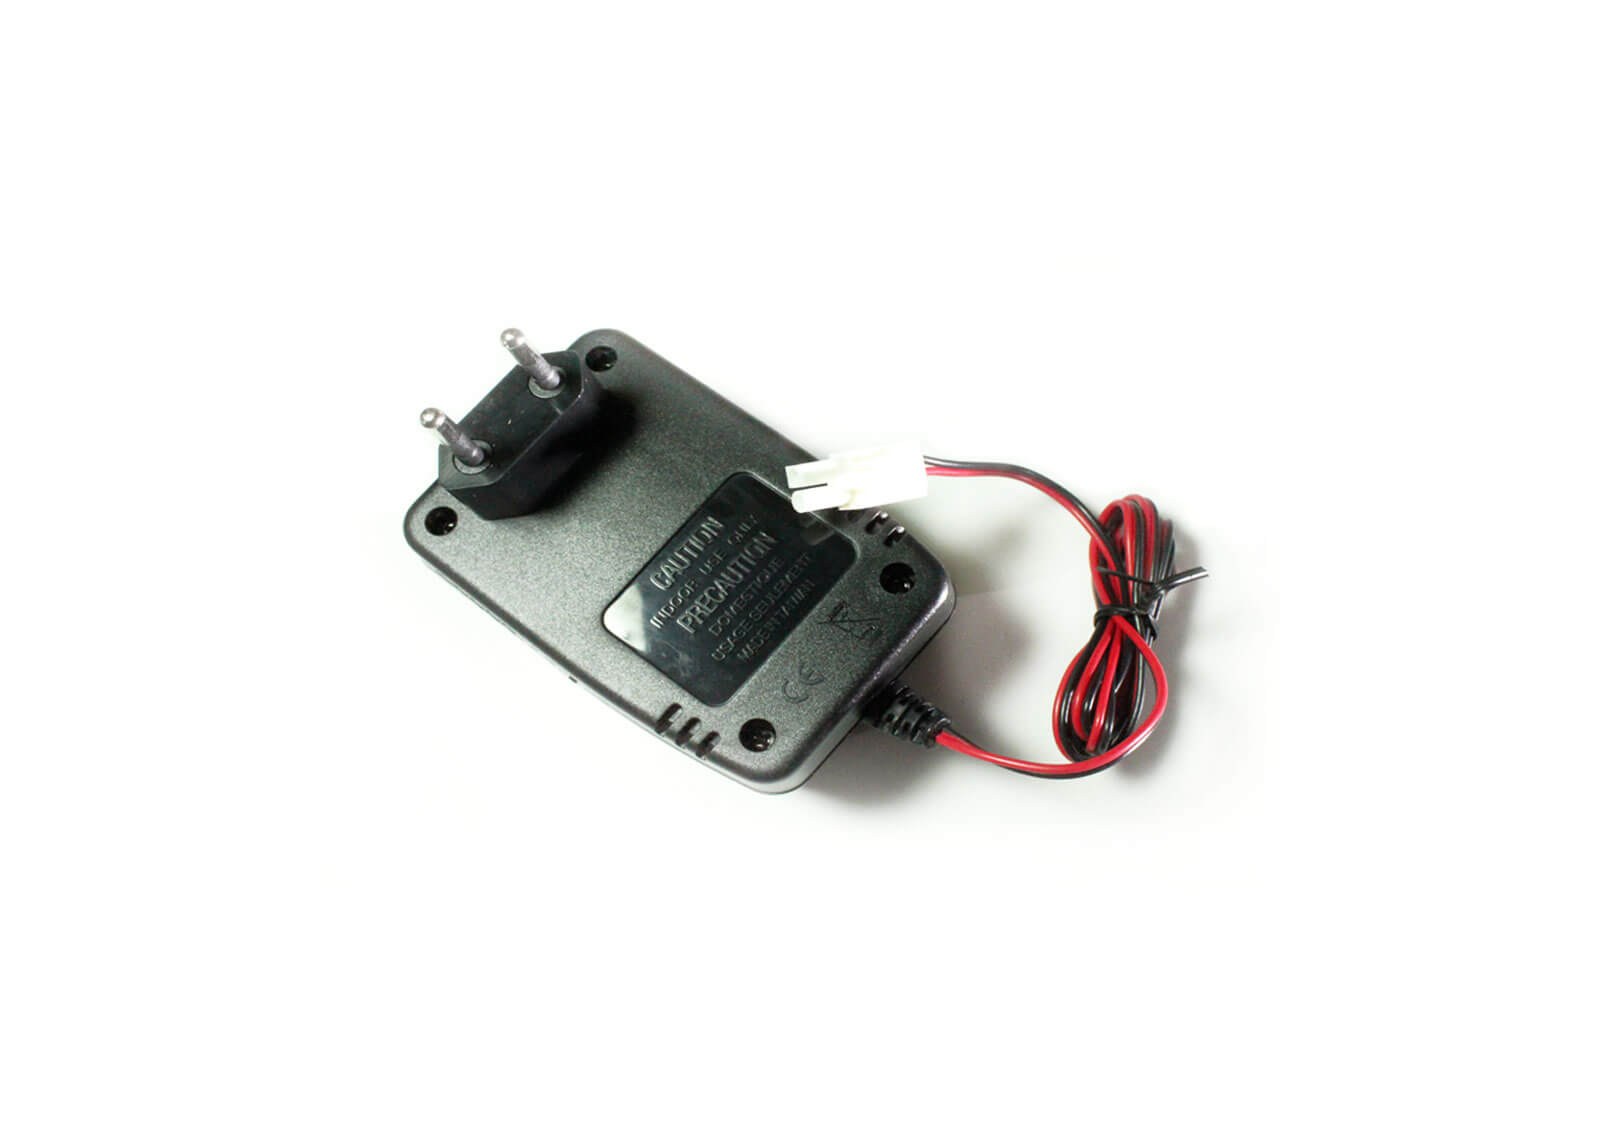 AC 2 CELL LI- POLYMER CHARGER/ 110V - Modify Airsoft Accessories